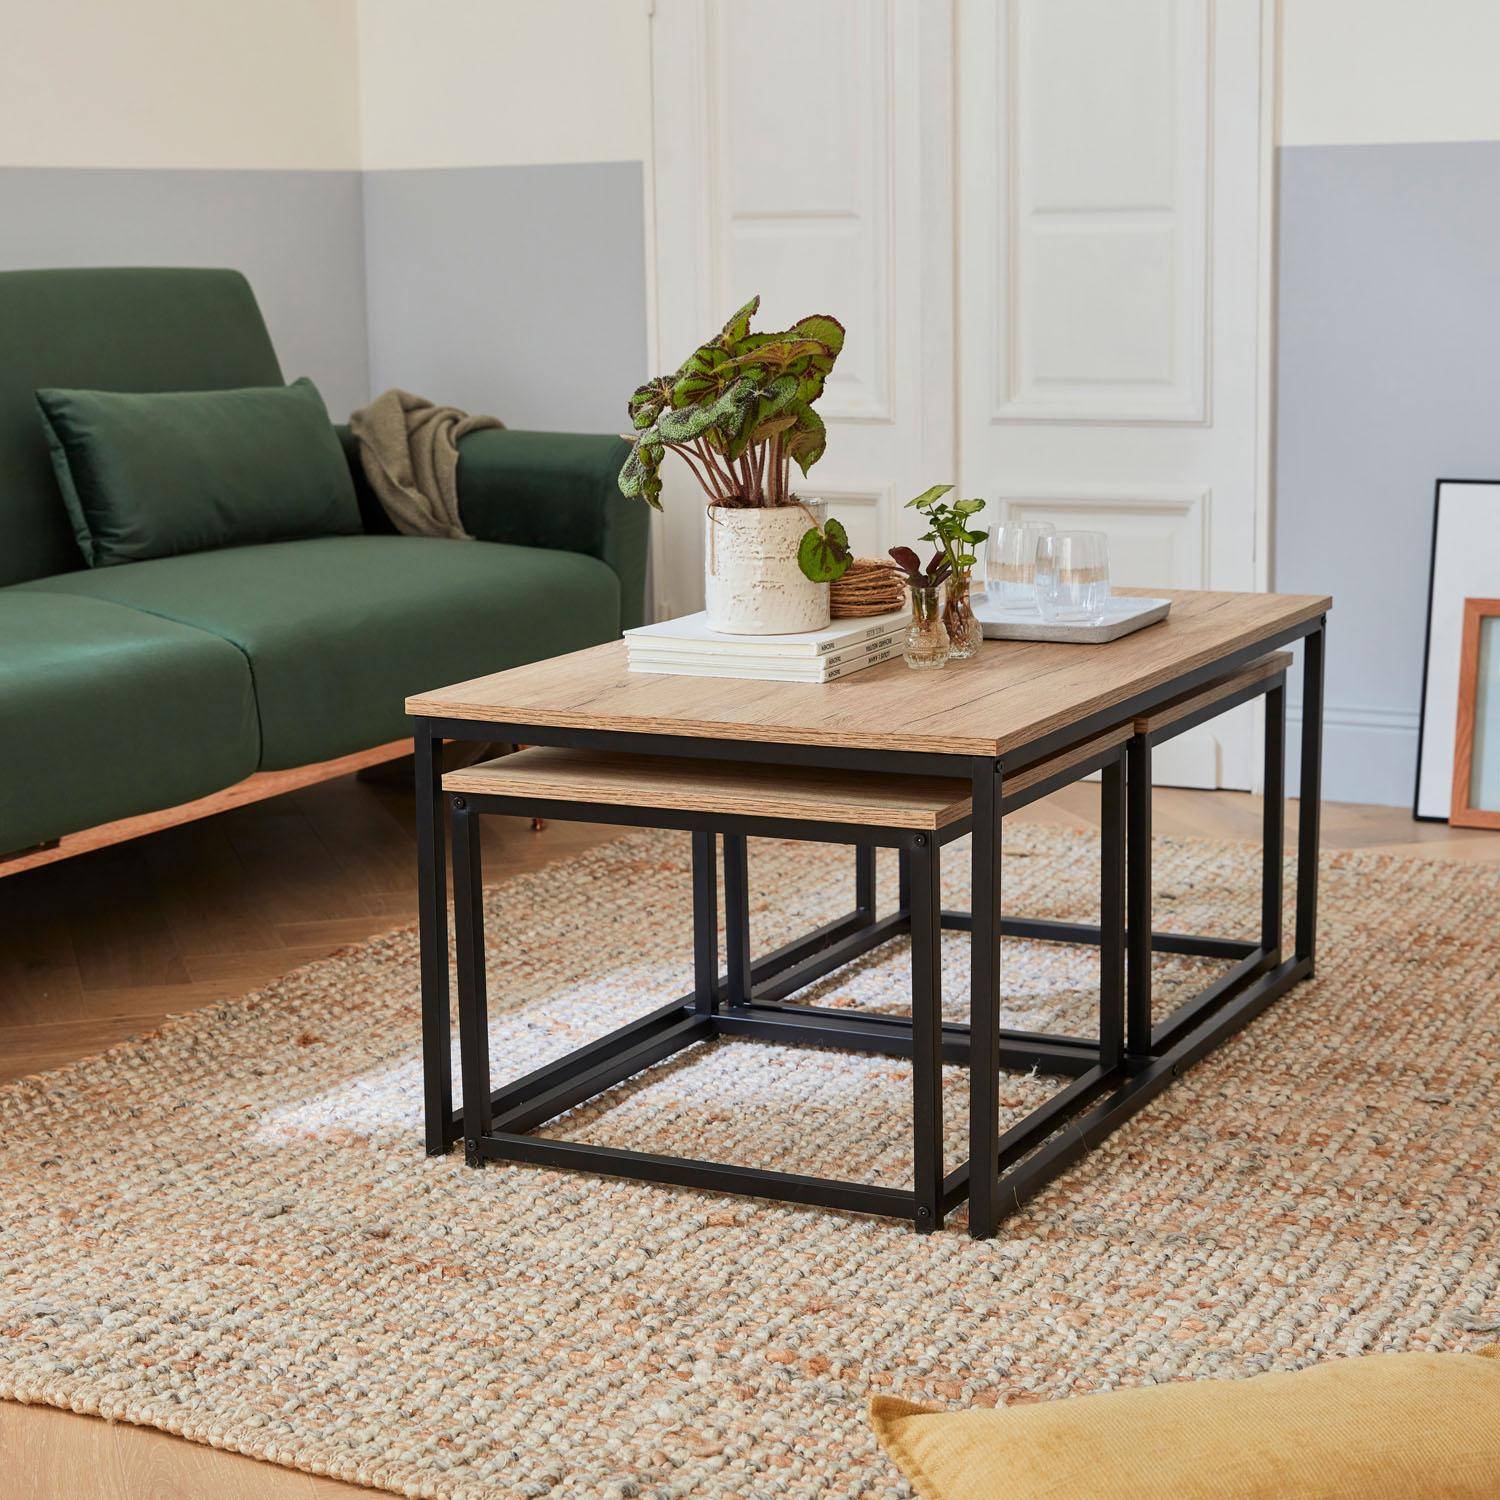 Set of 3 metal and wood-effect nesting tables, large table 100x60x45cm, 2x small tables 50x50x38cm - Loft - Black,sweeek,Photo2